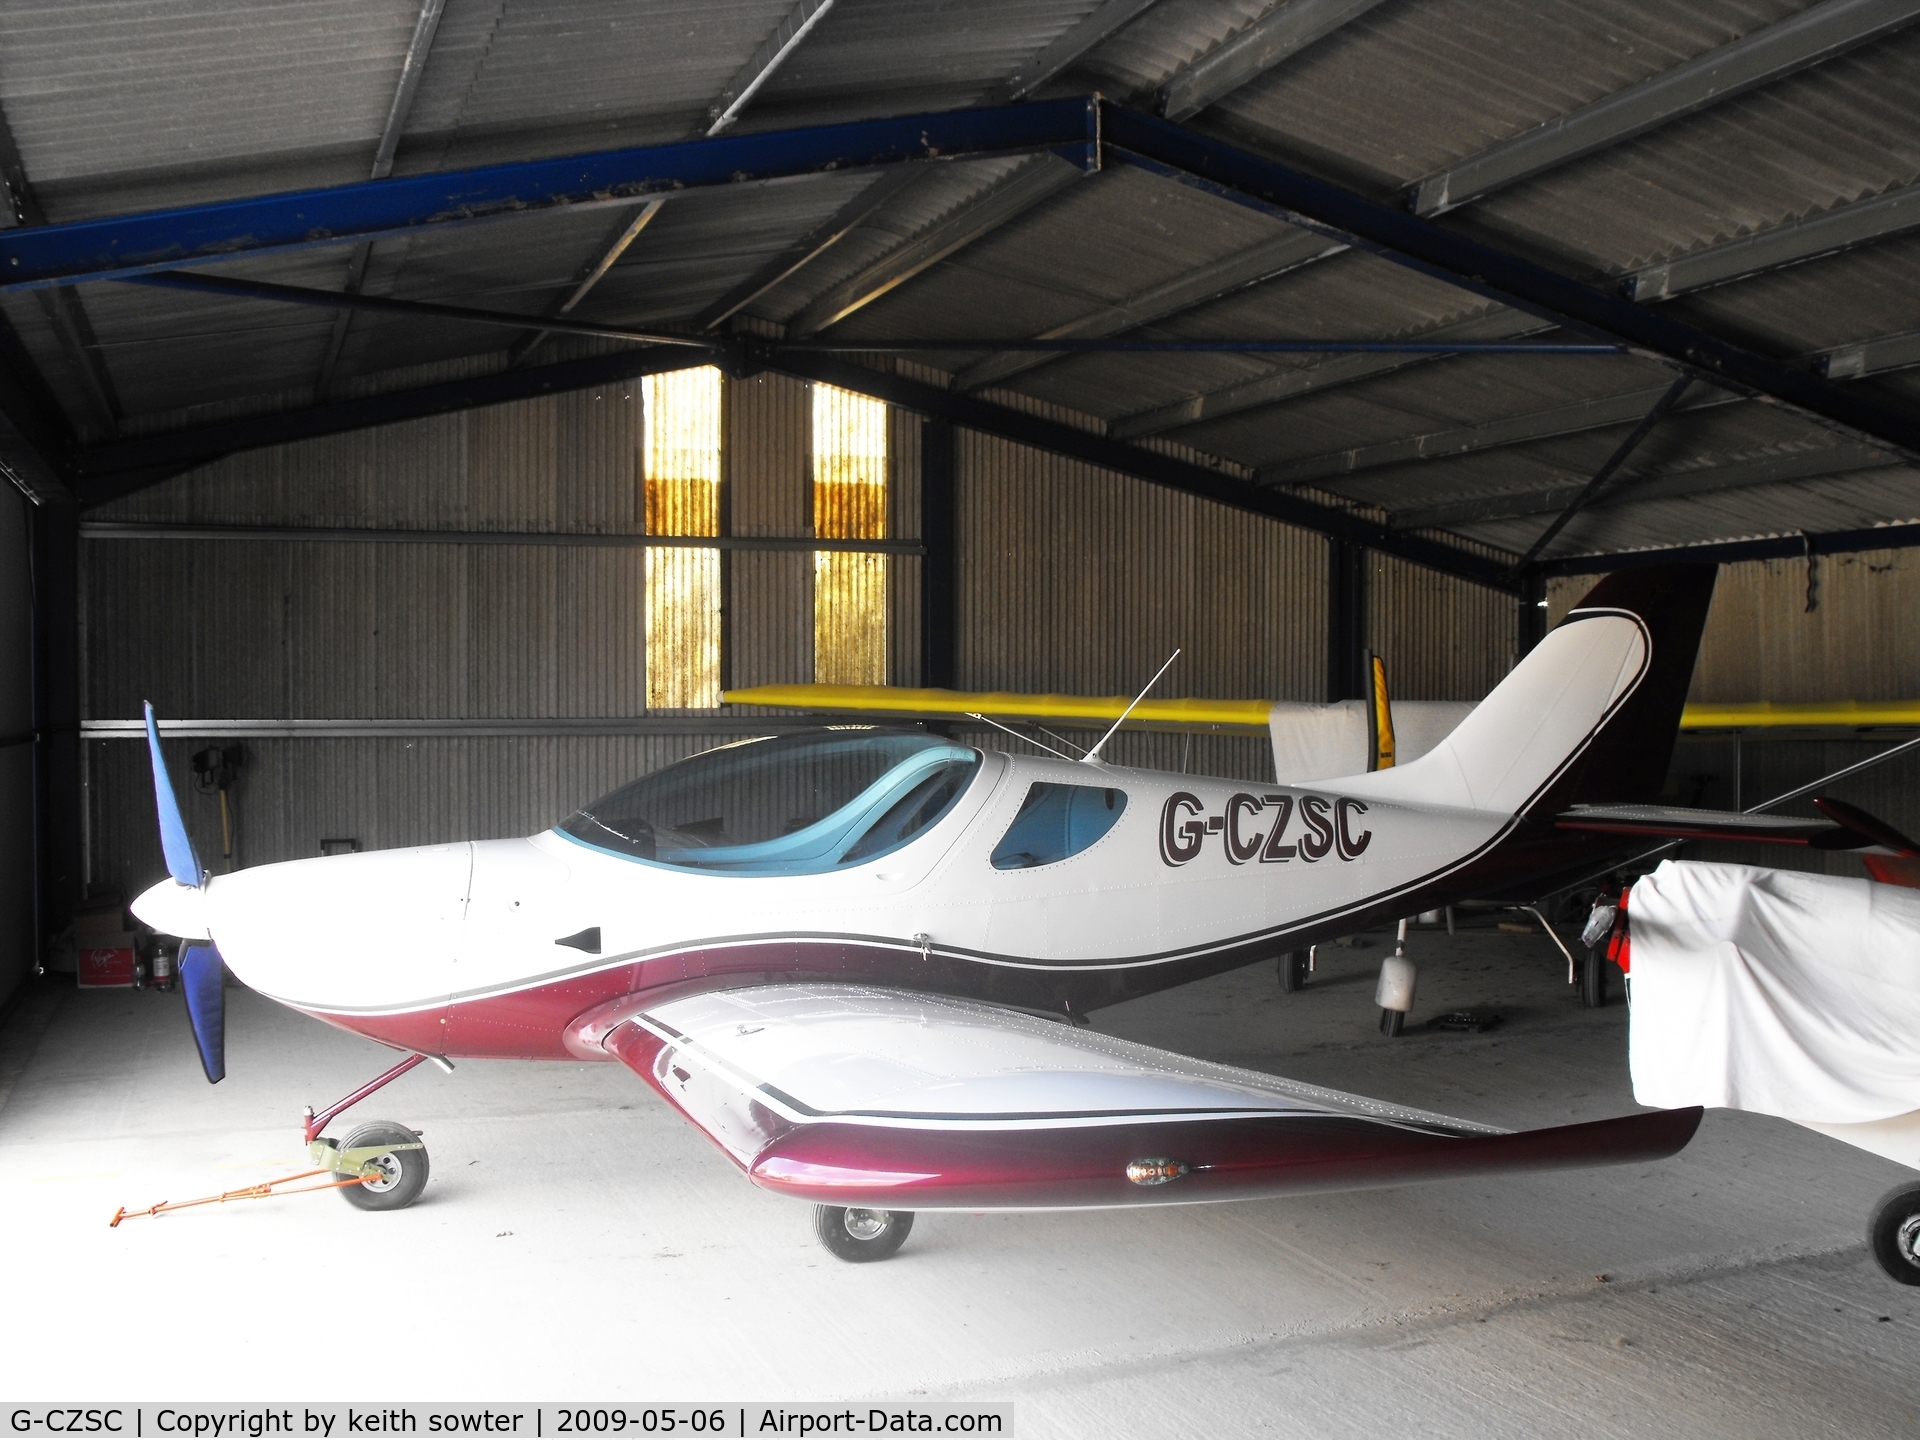 G-CZSC, 2009 CZAW SportCruiser C/N LAA 338-14814, Nearly ready for its first flight from its Priory FArm base